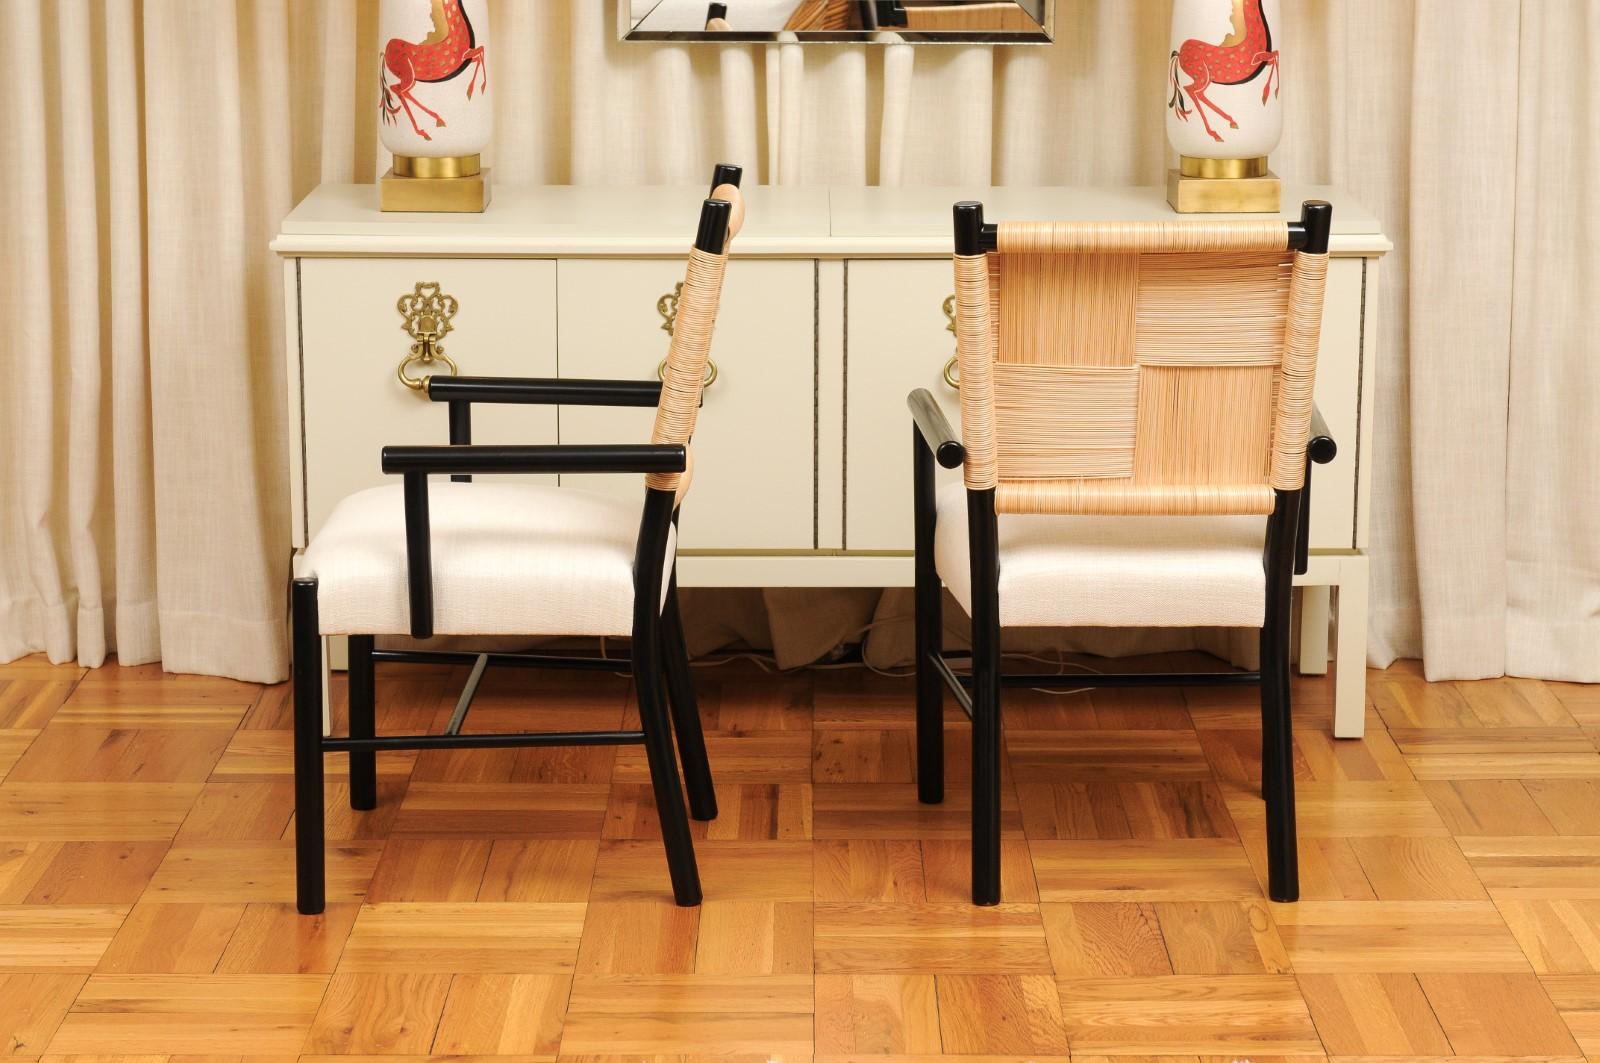 All Arms- Sublime Set of 14 Cane Back Dining Chairs by John Hutton for Donghia For Sale 6